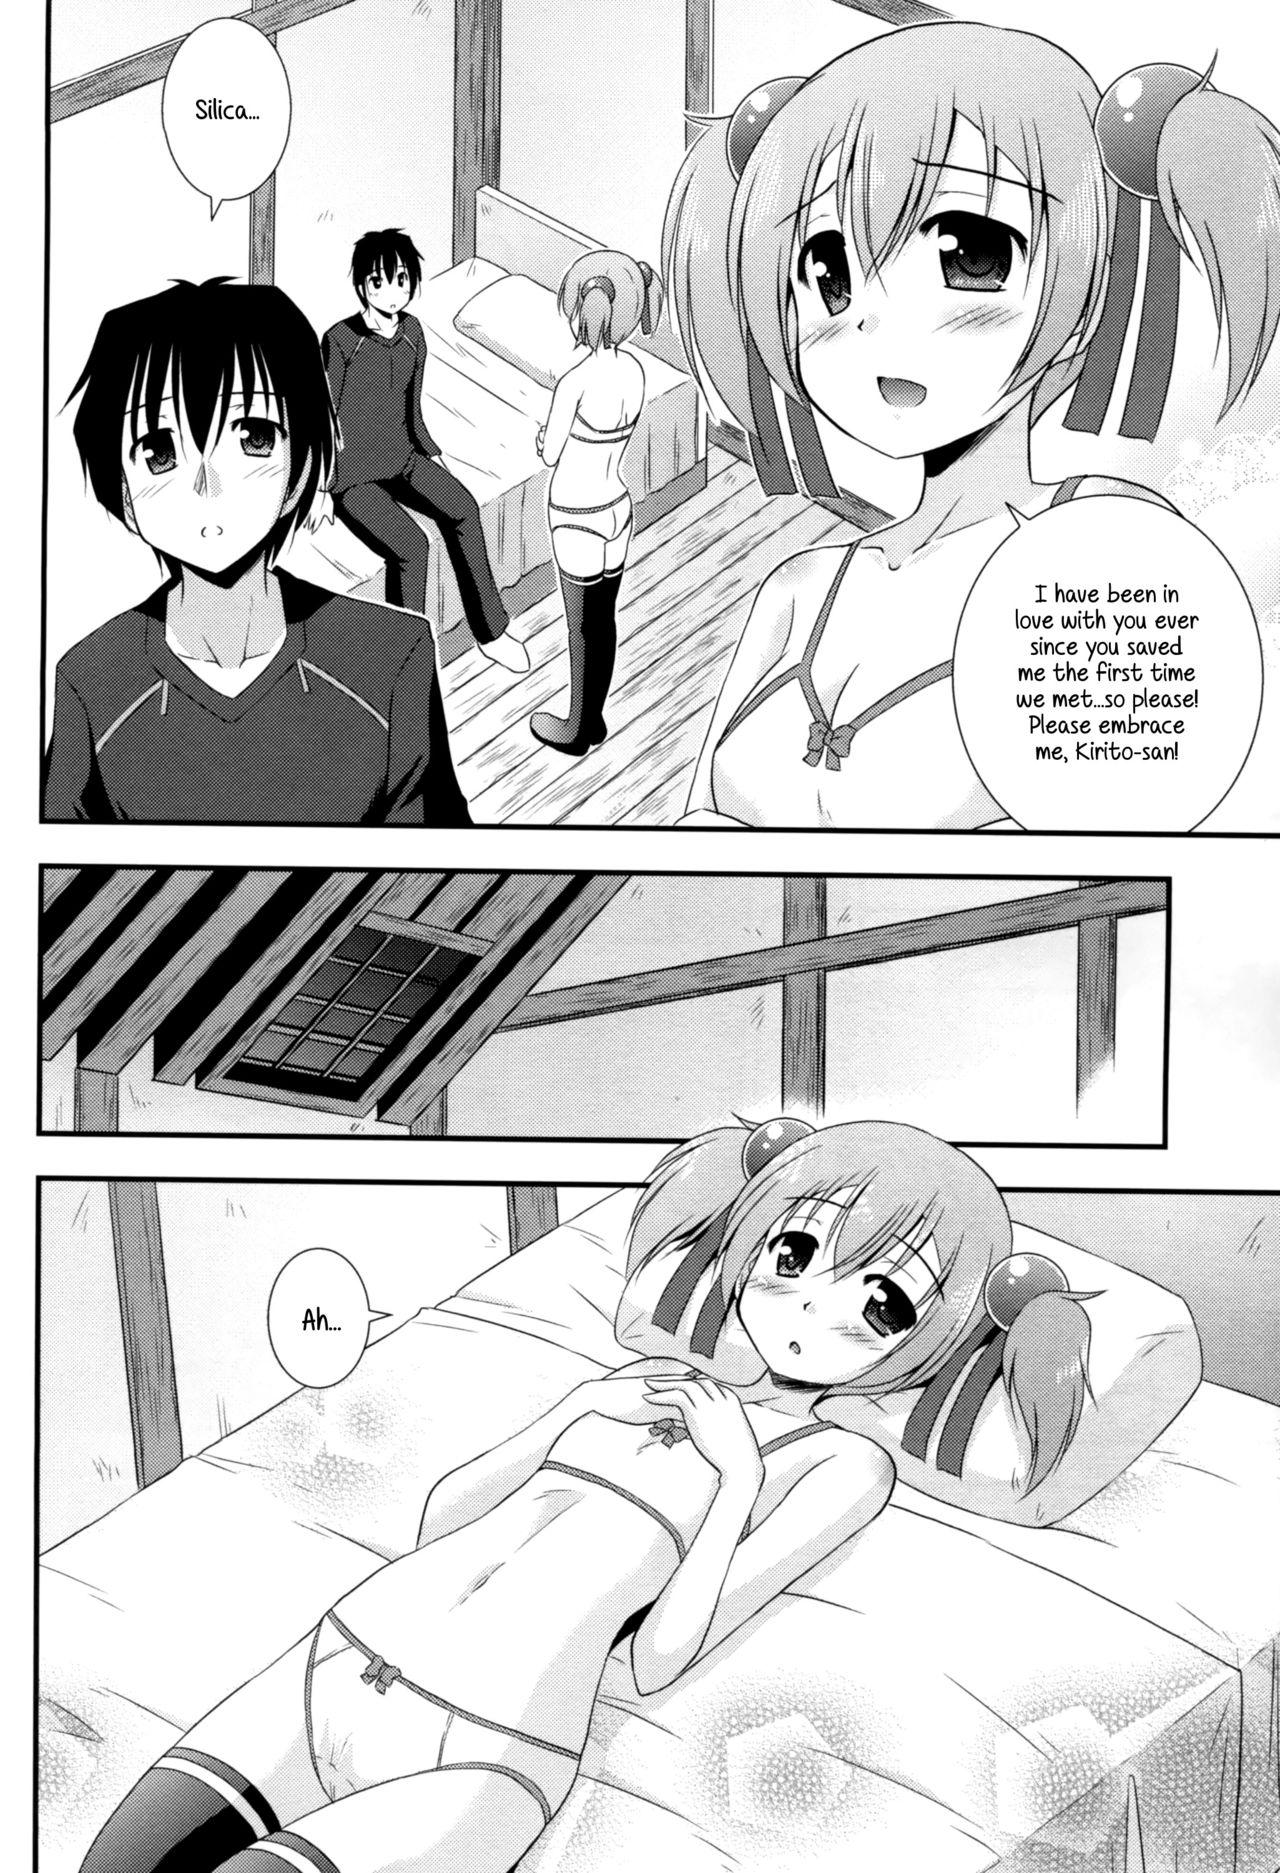 Silica Route Online 12